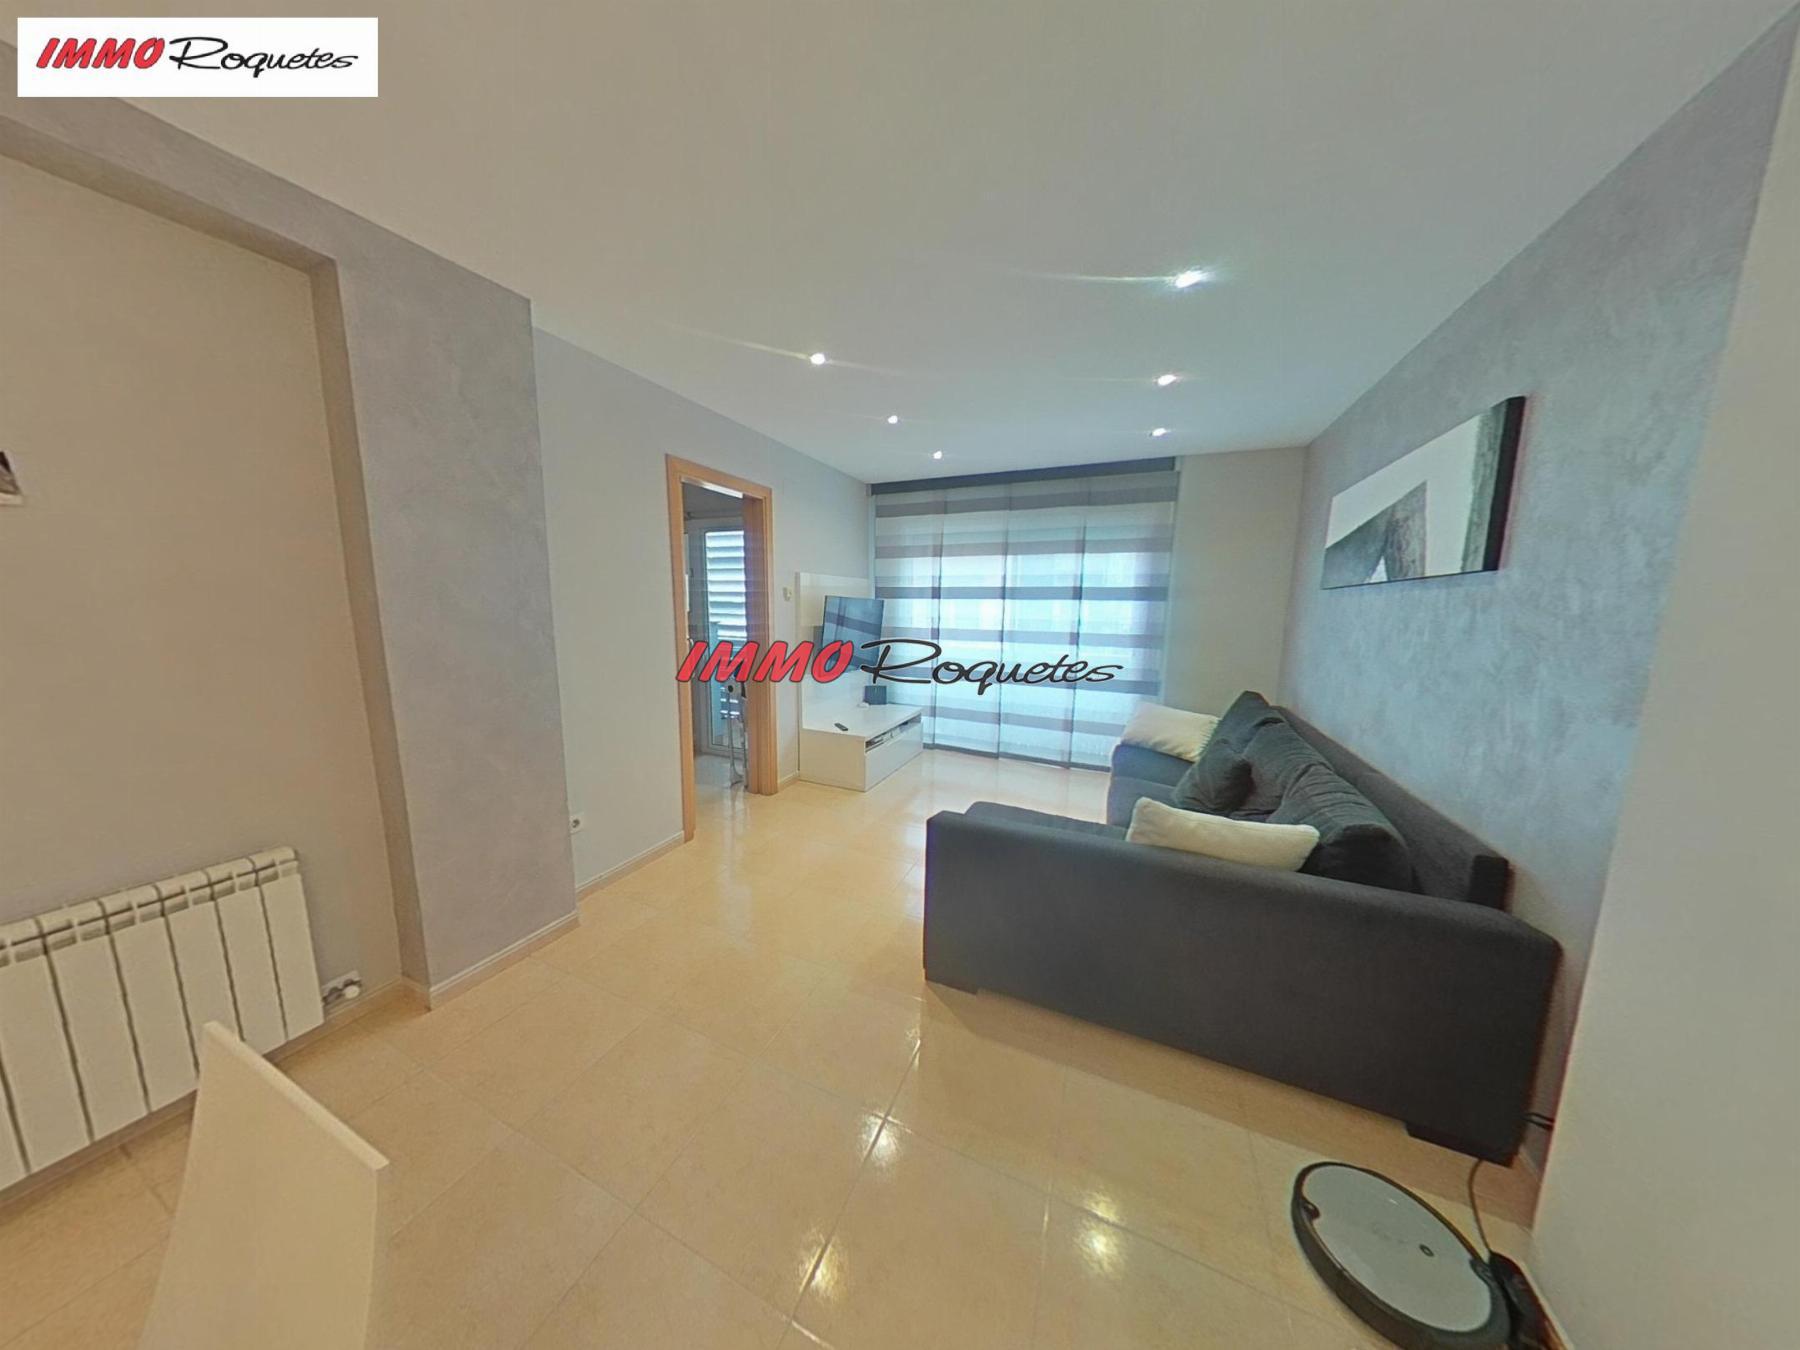 For sale of flat in Sant Pere de Ribes